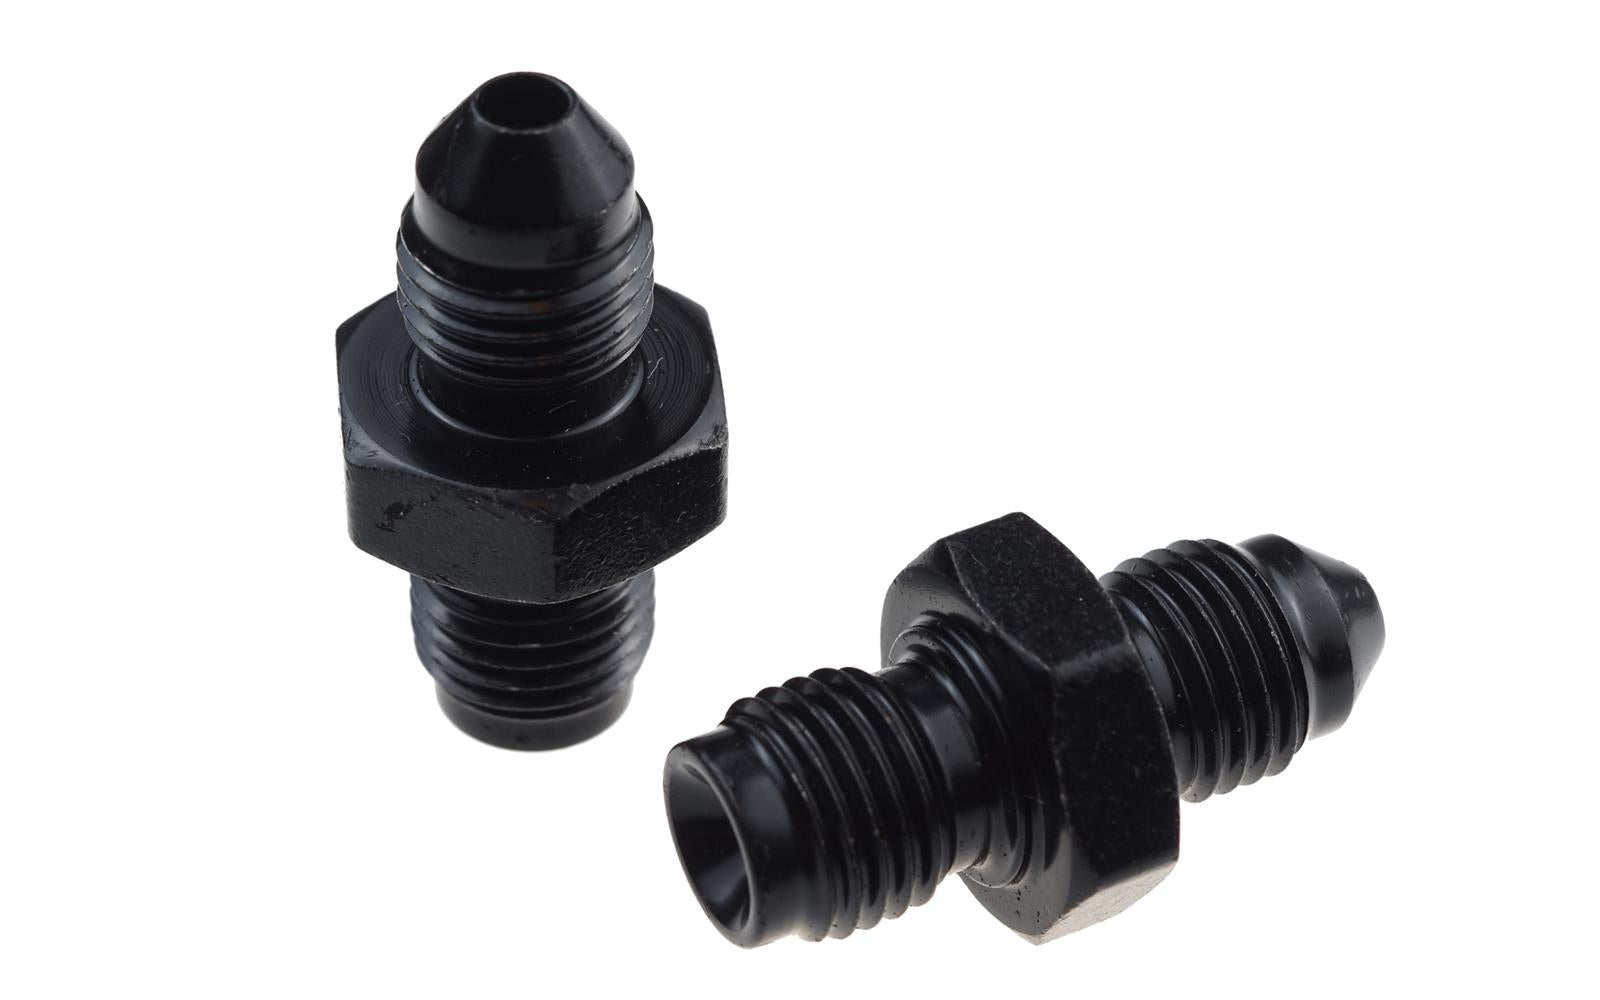 Redhorse Performance 336-04-11-2 -04 to 10mmx1.0 Male inverted flare -black-2pcs/pkg